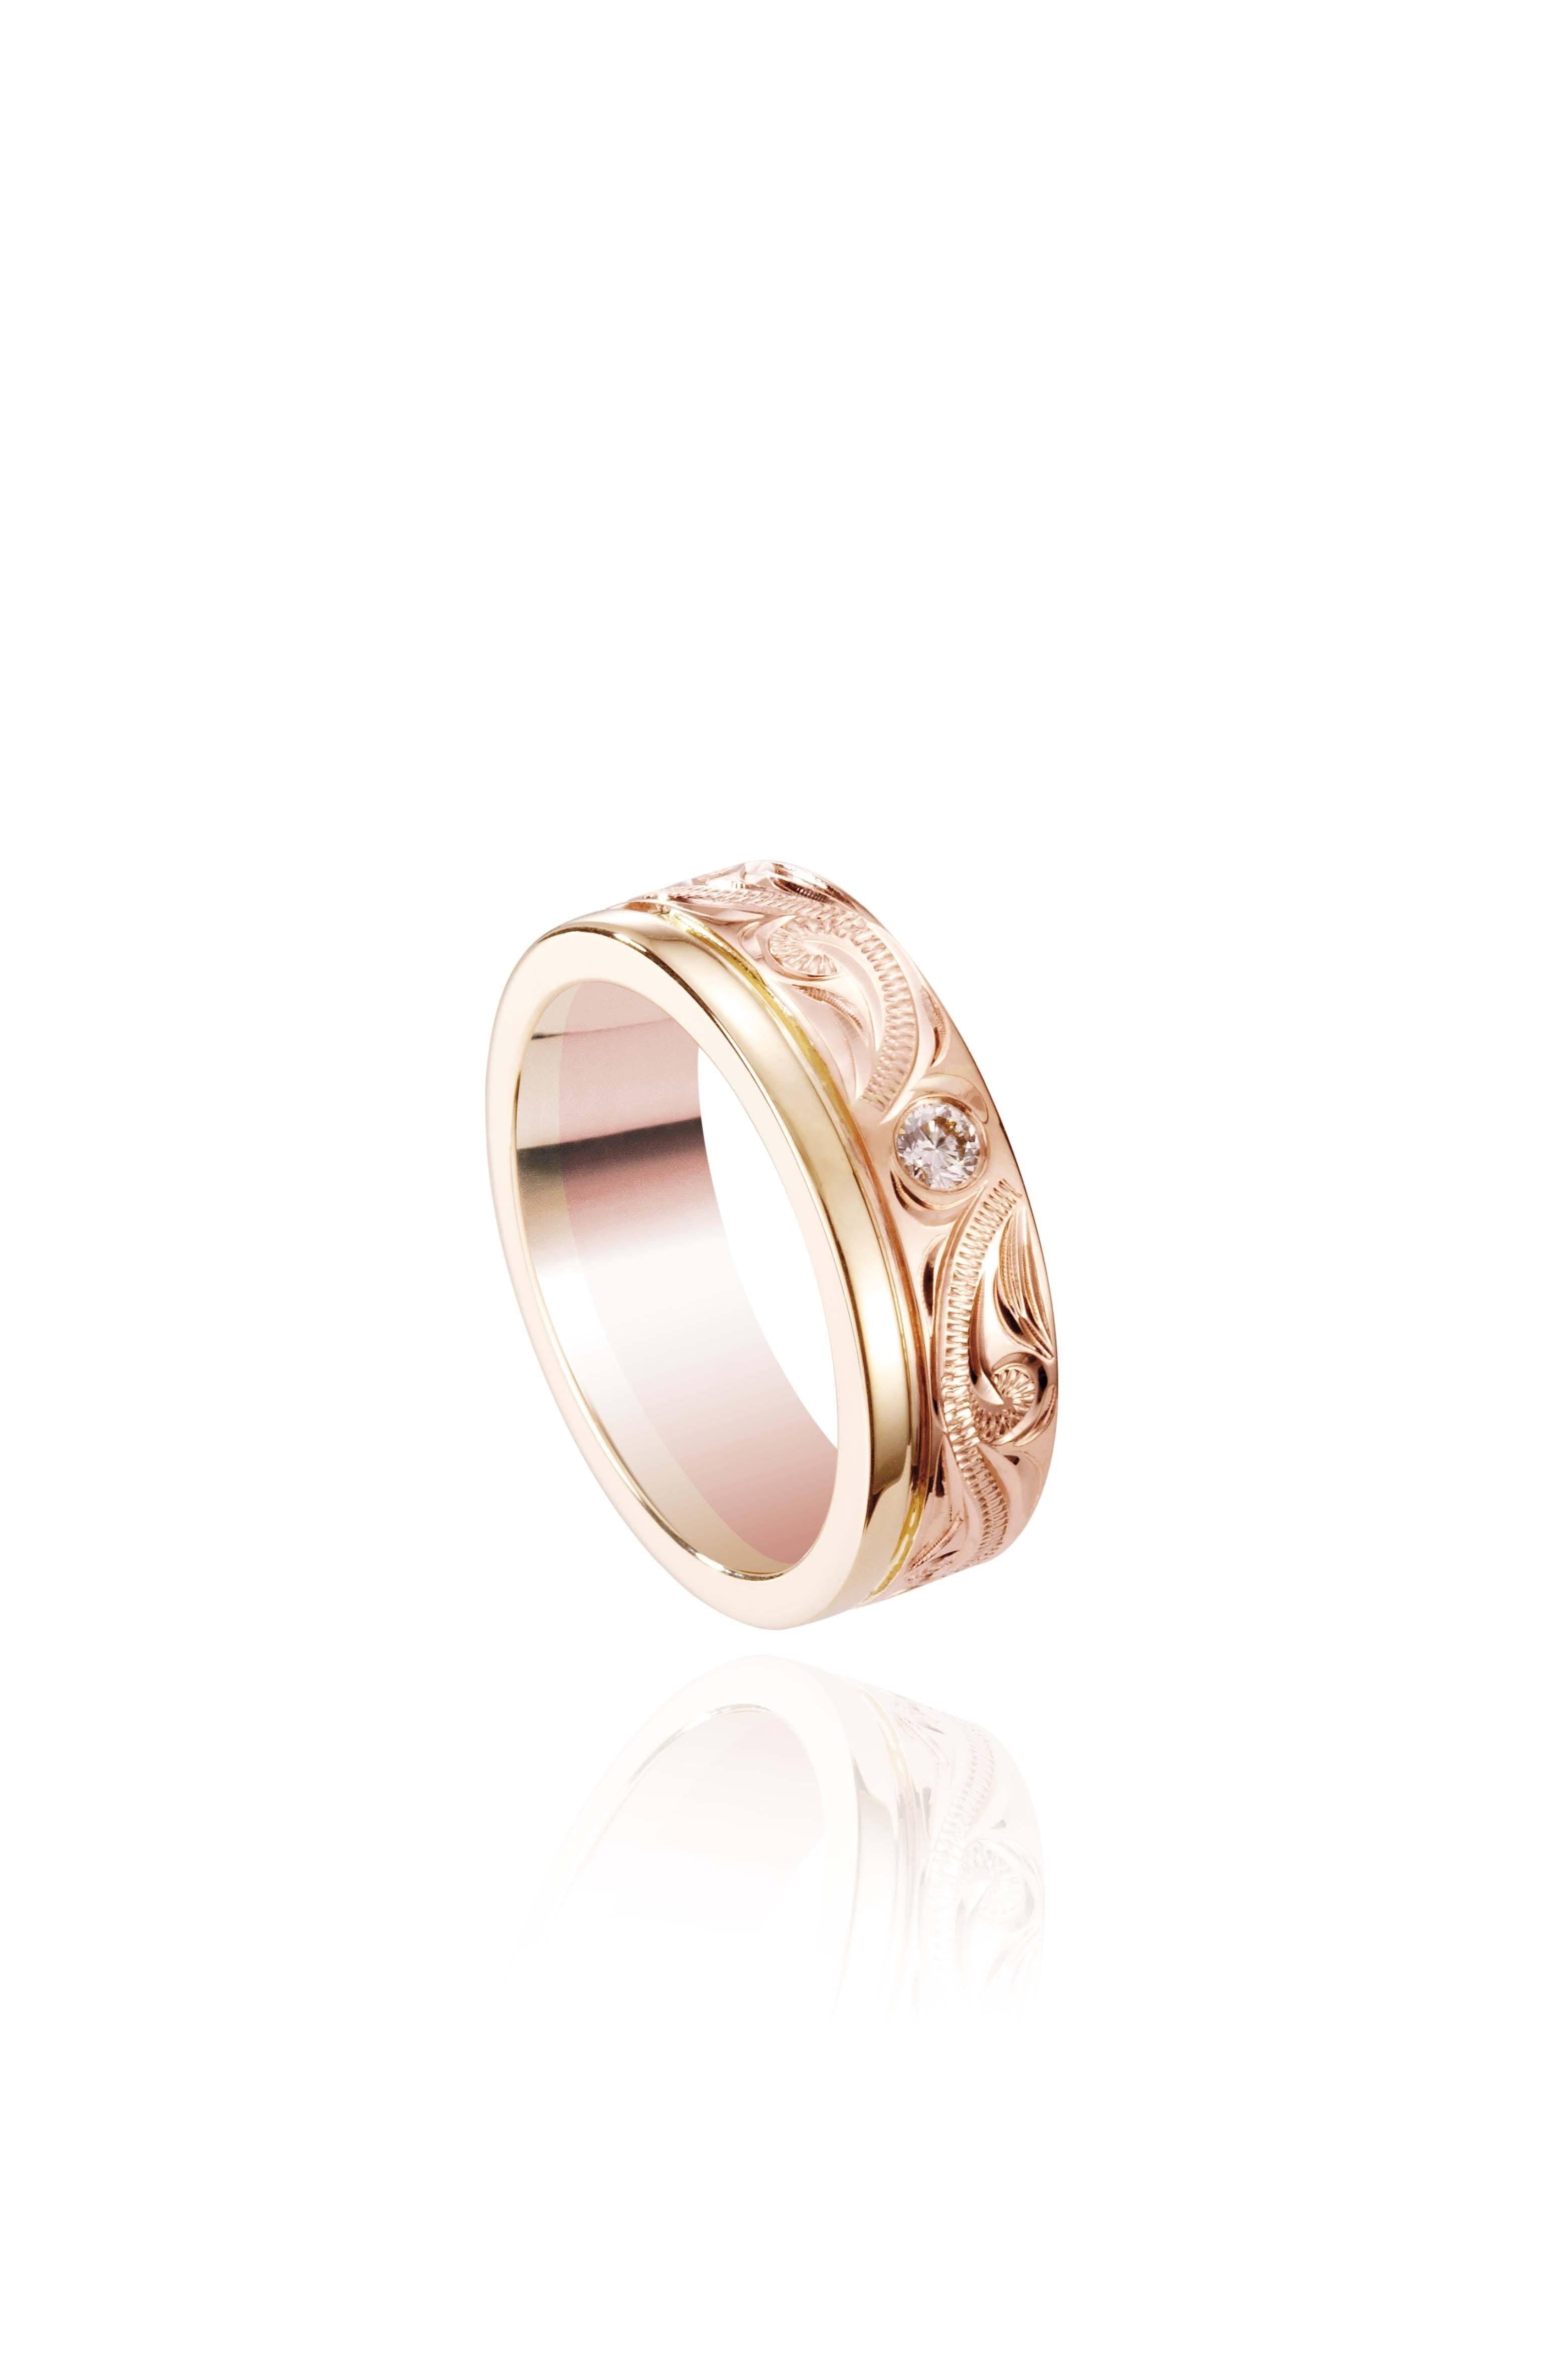 The picture shows a 14K yellow and rose gold two-tone wave channel 6mm ring with a diamond and hand-engravings.